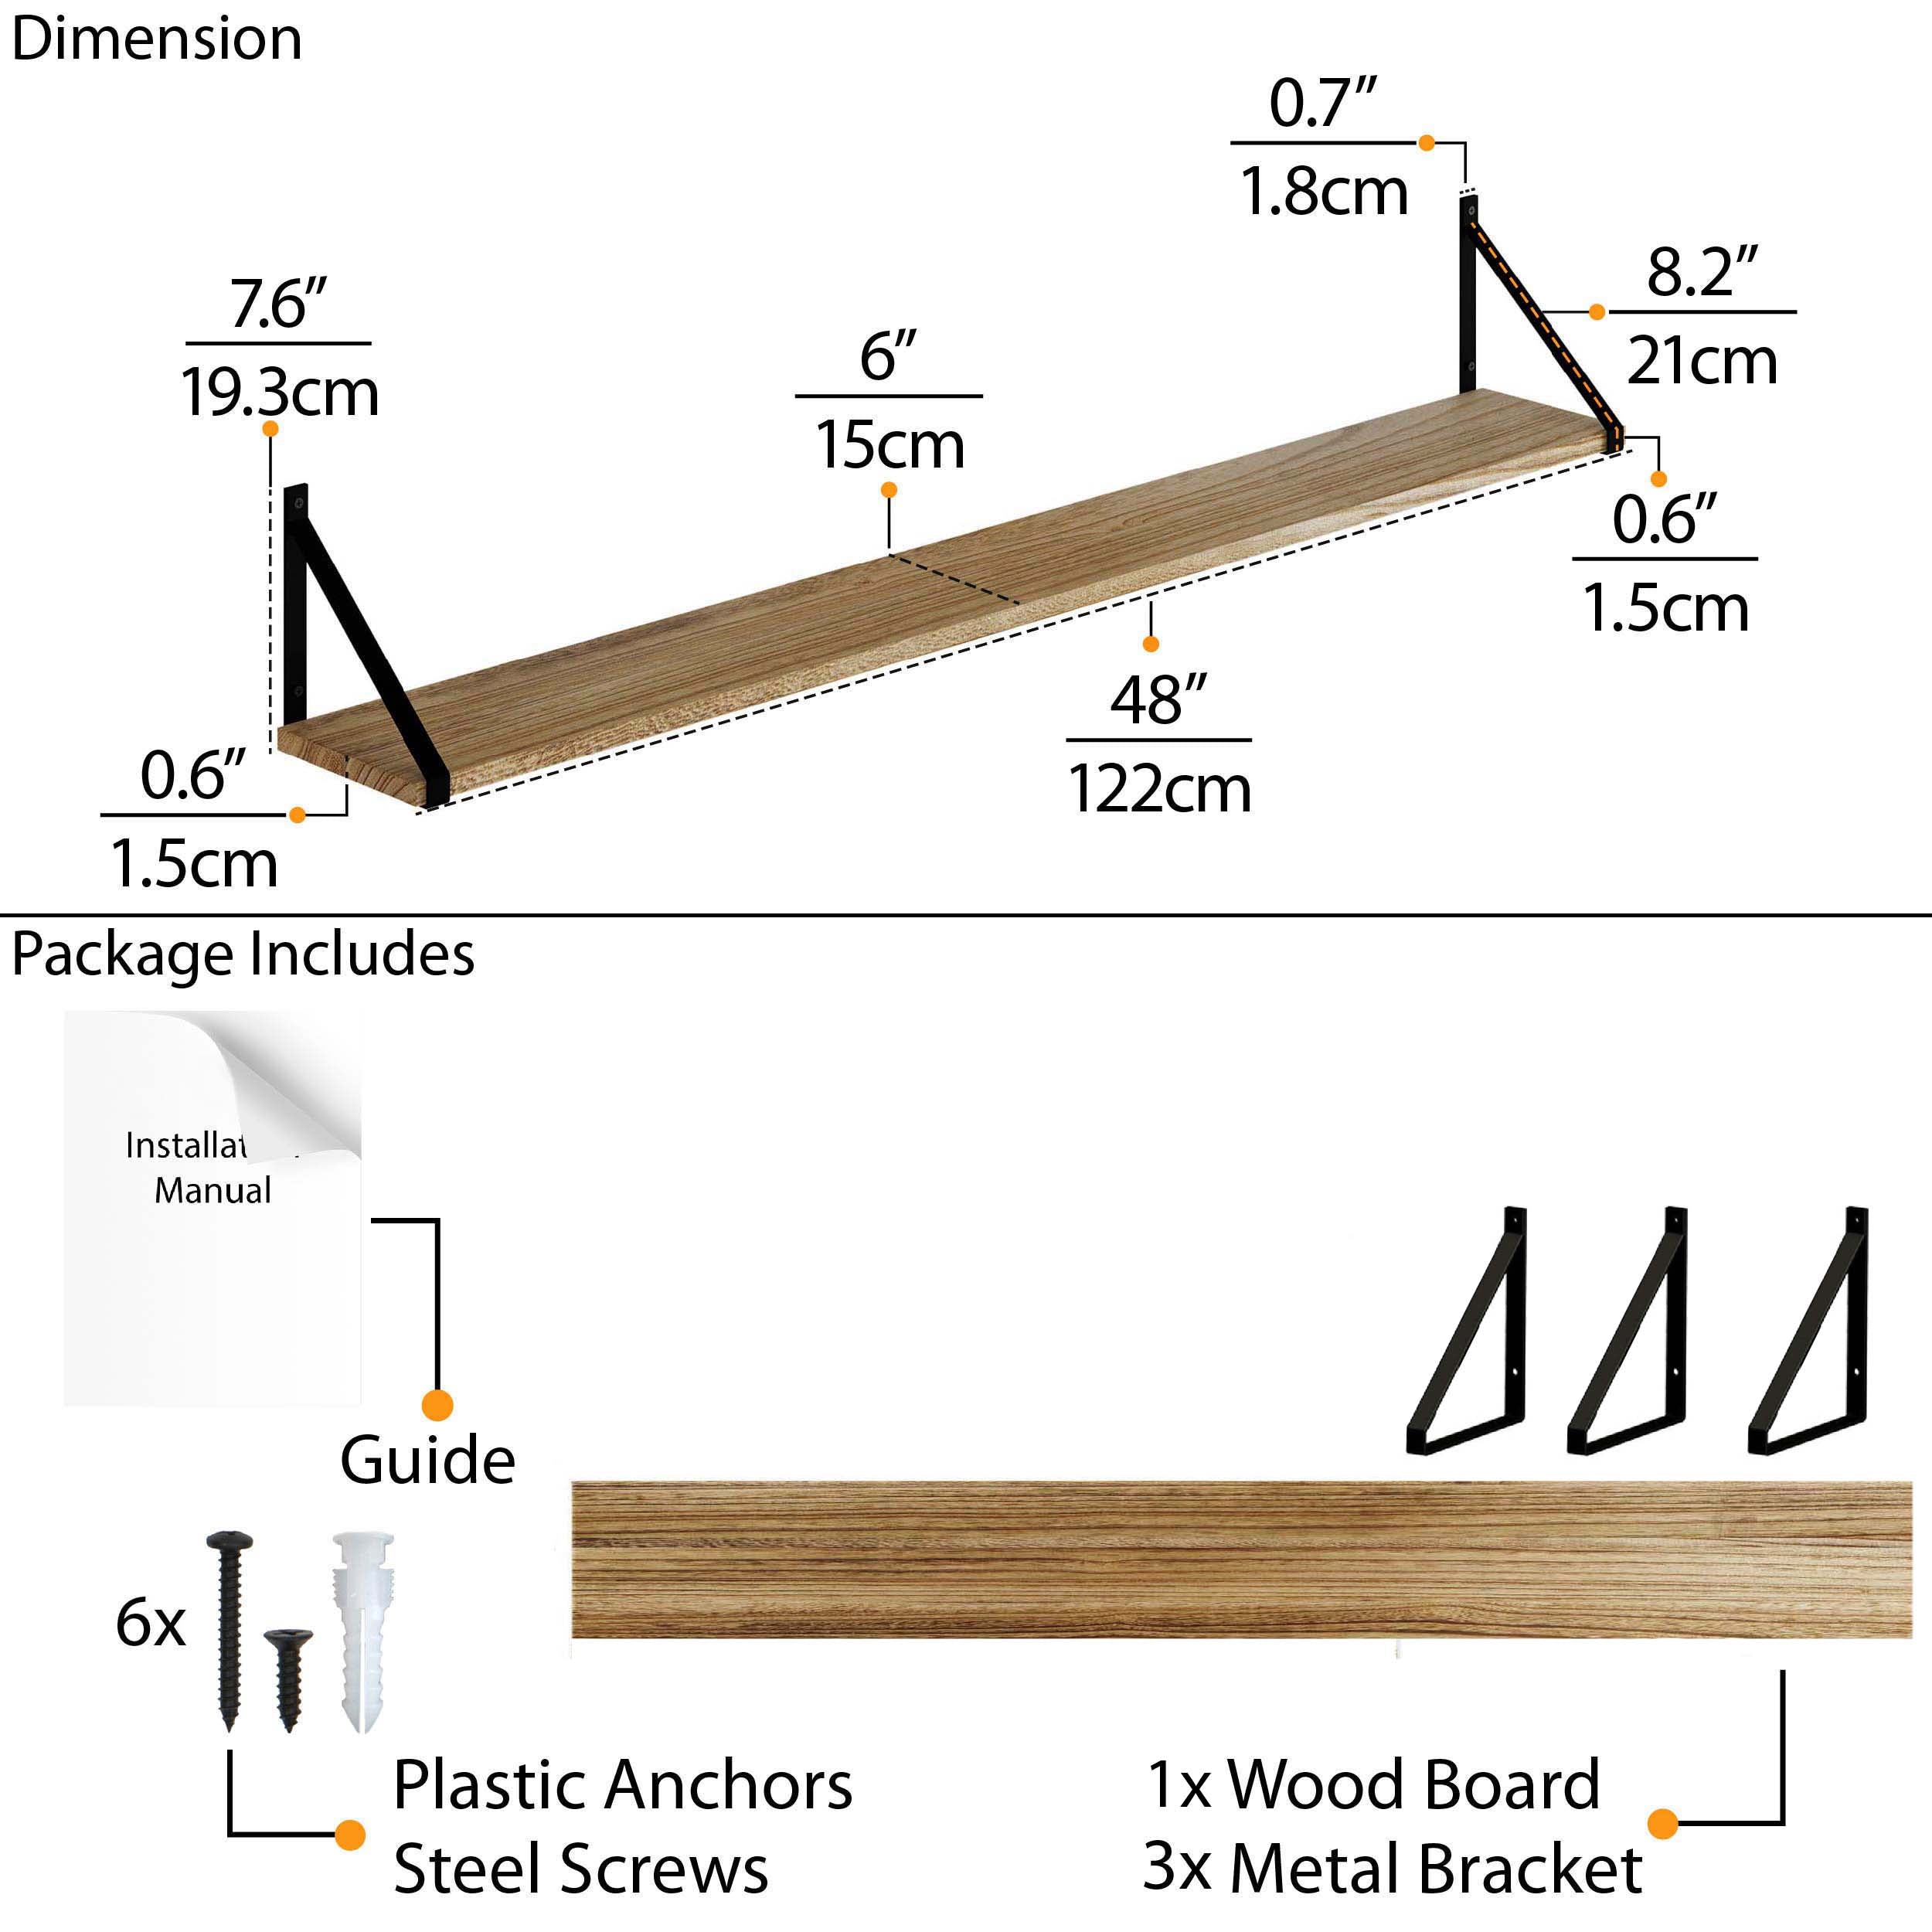 Detailed dimensions and installation guide for a 48 inch floating shelf with black metal brackets.